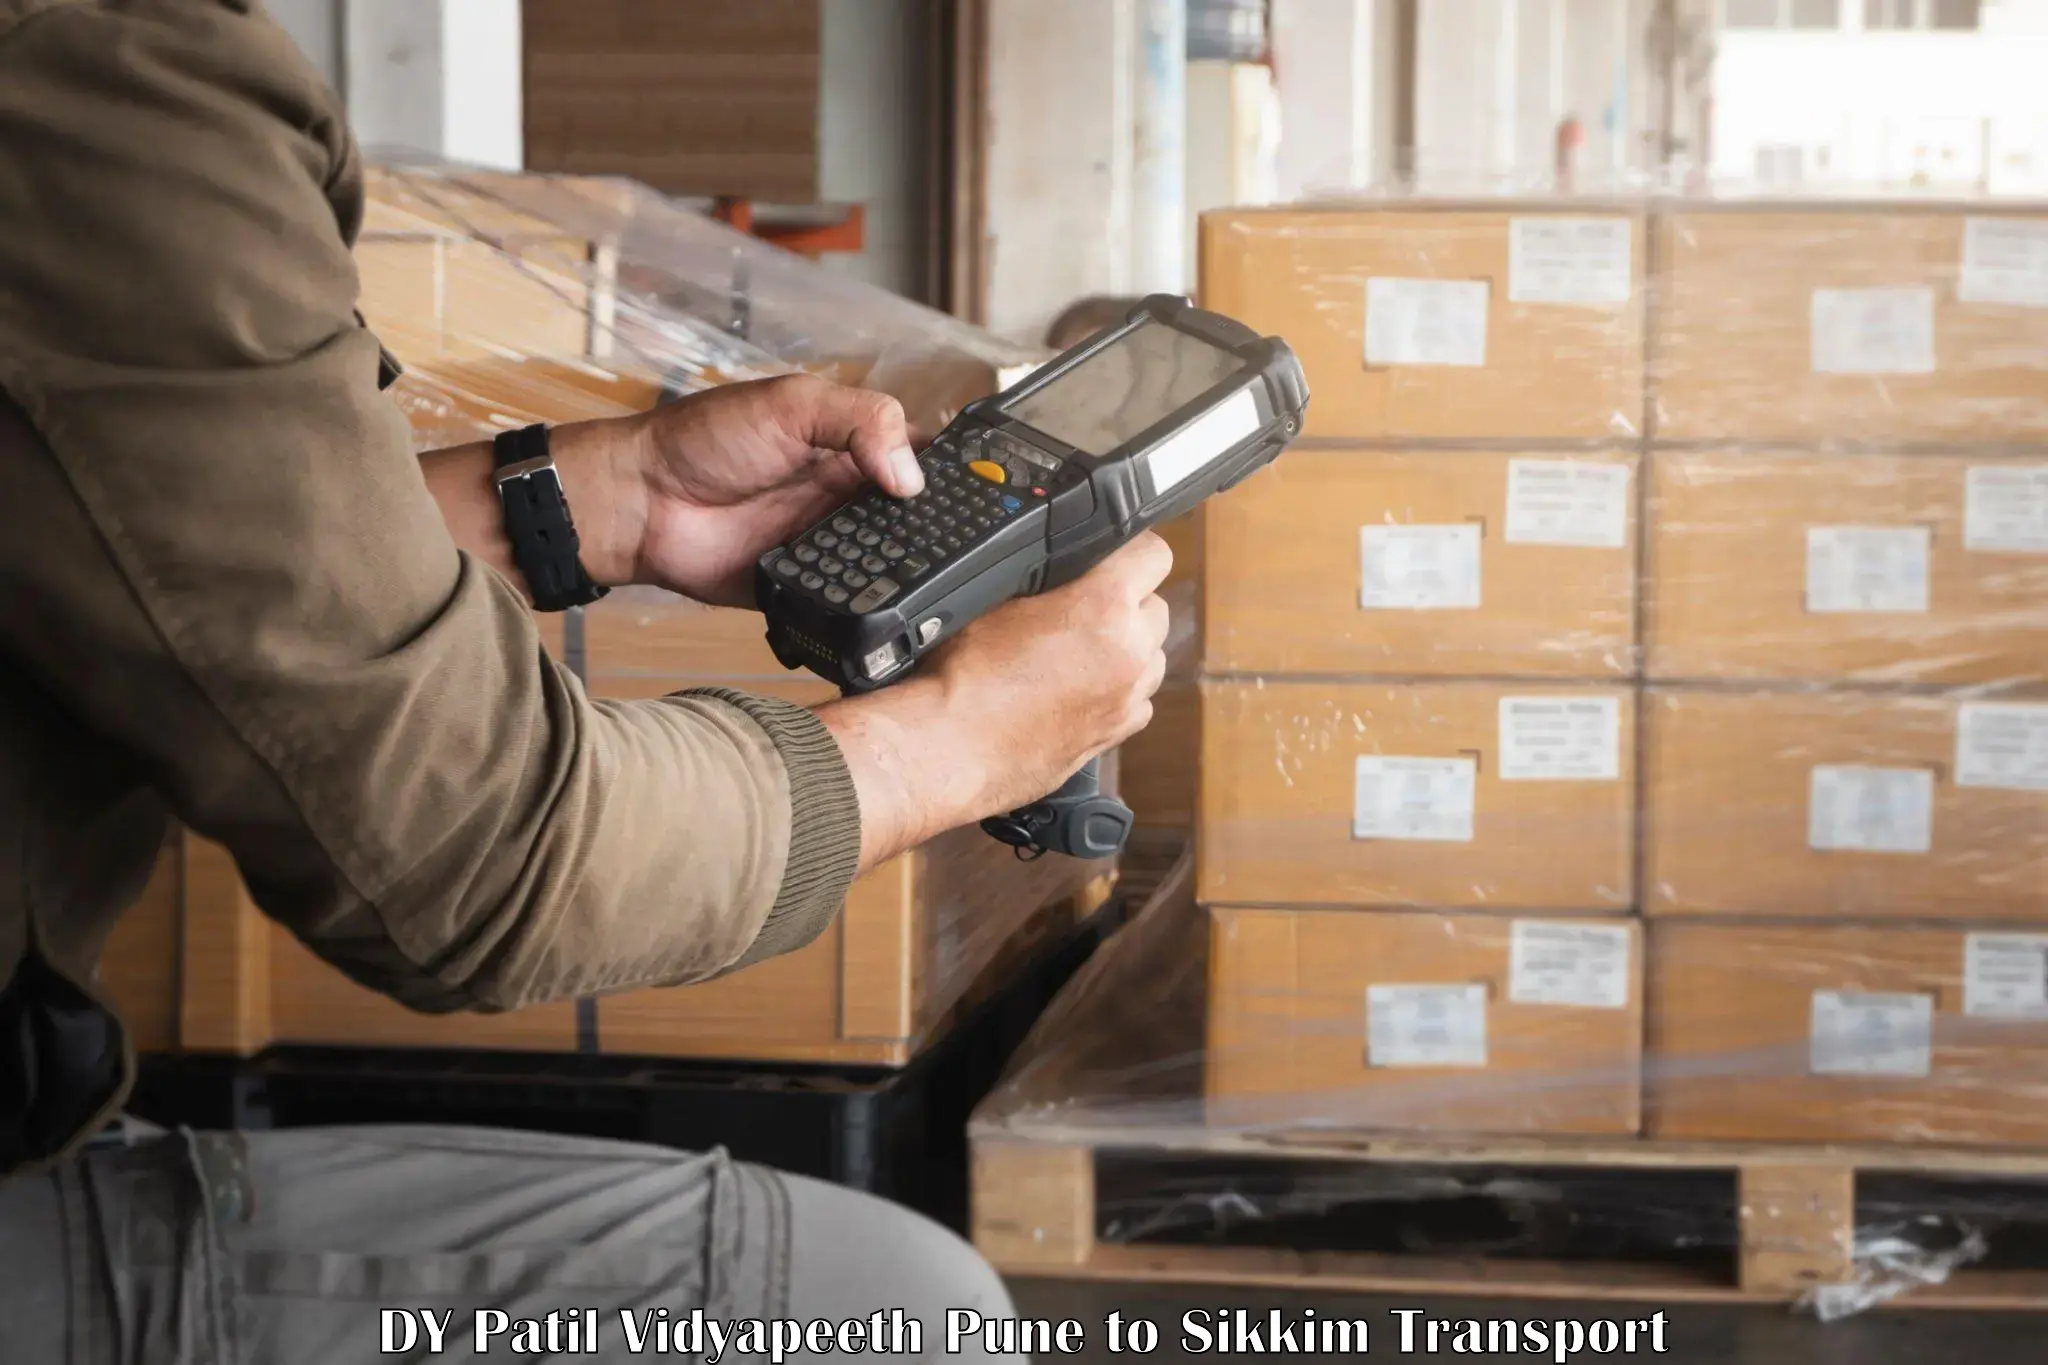 Shipping services DY Patil Vidyapeeth Pune to East Sikkim